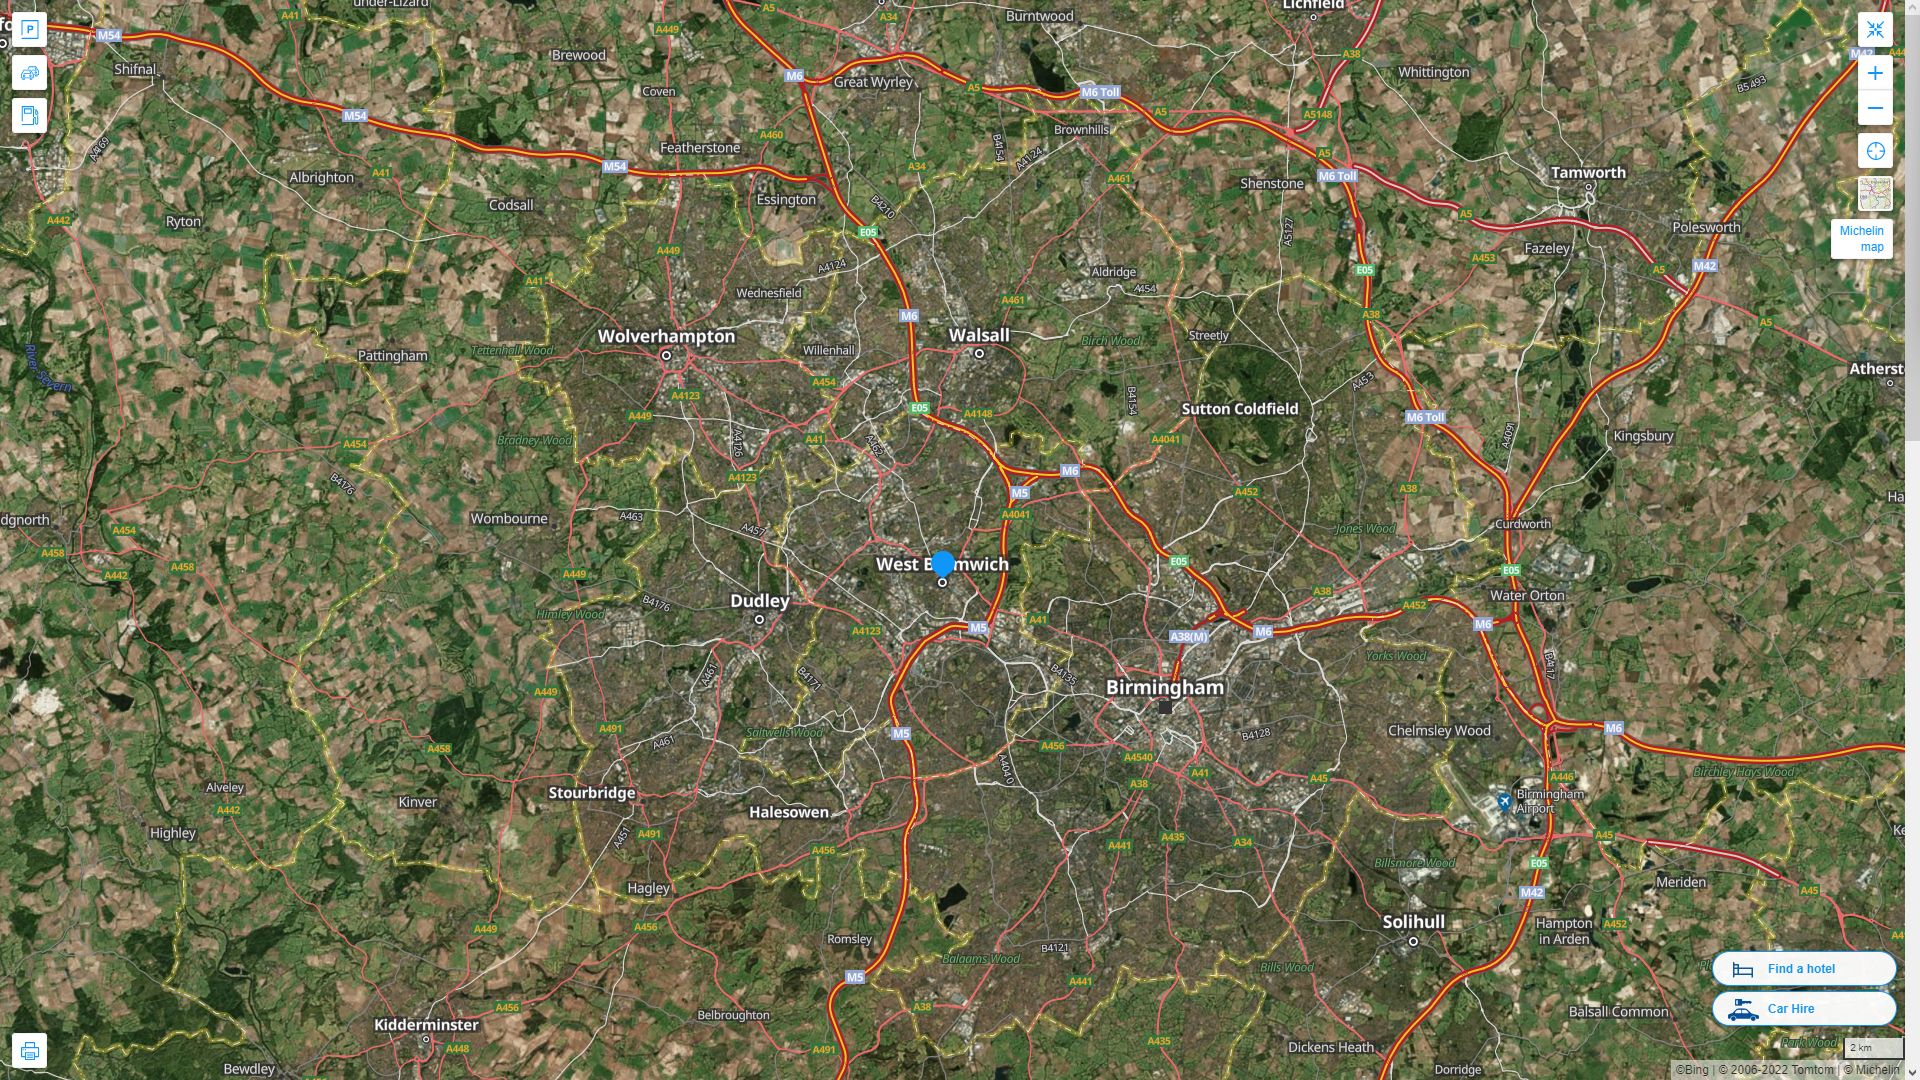 West Bromwich Highway and Road Map with Satellite View